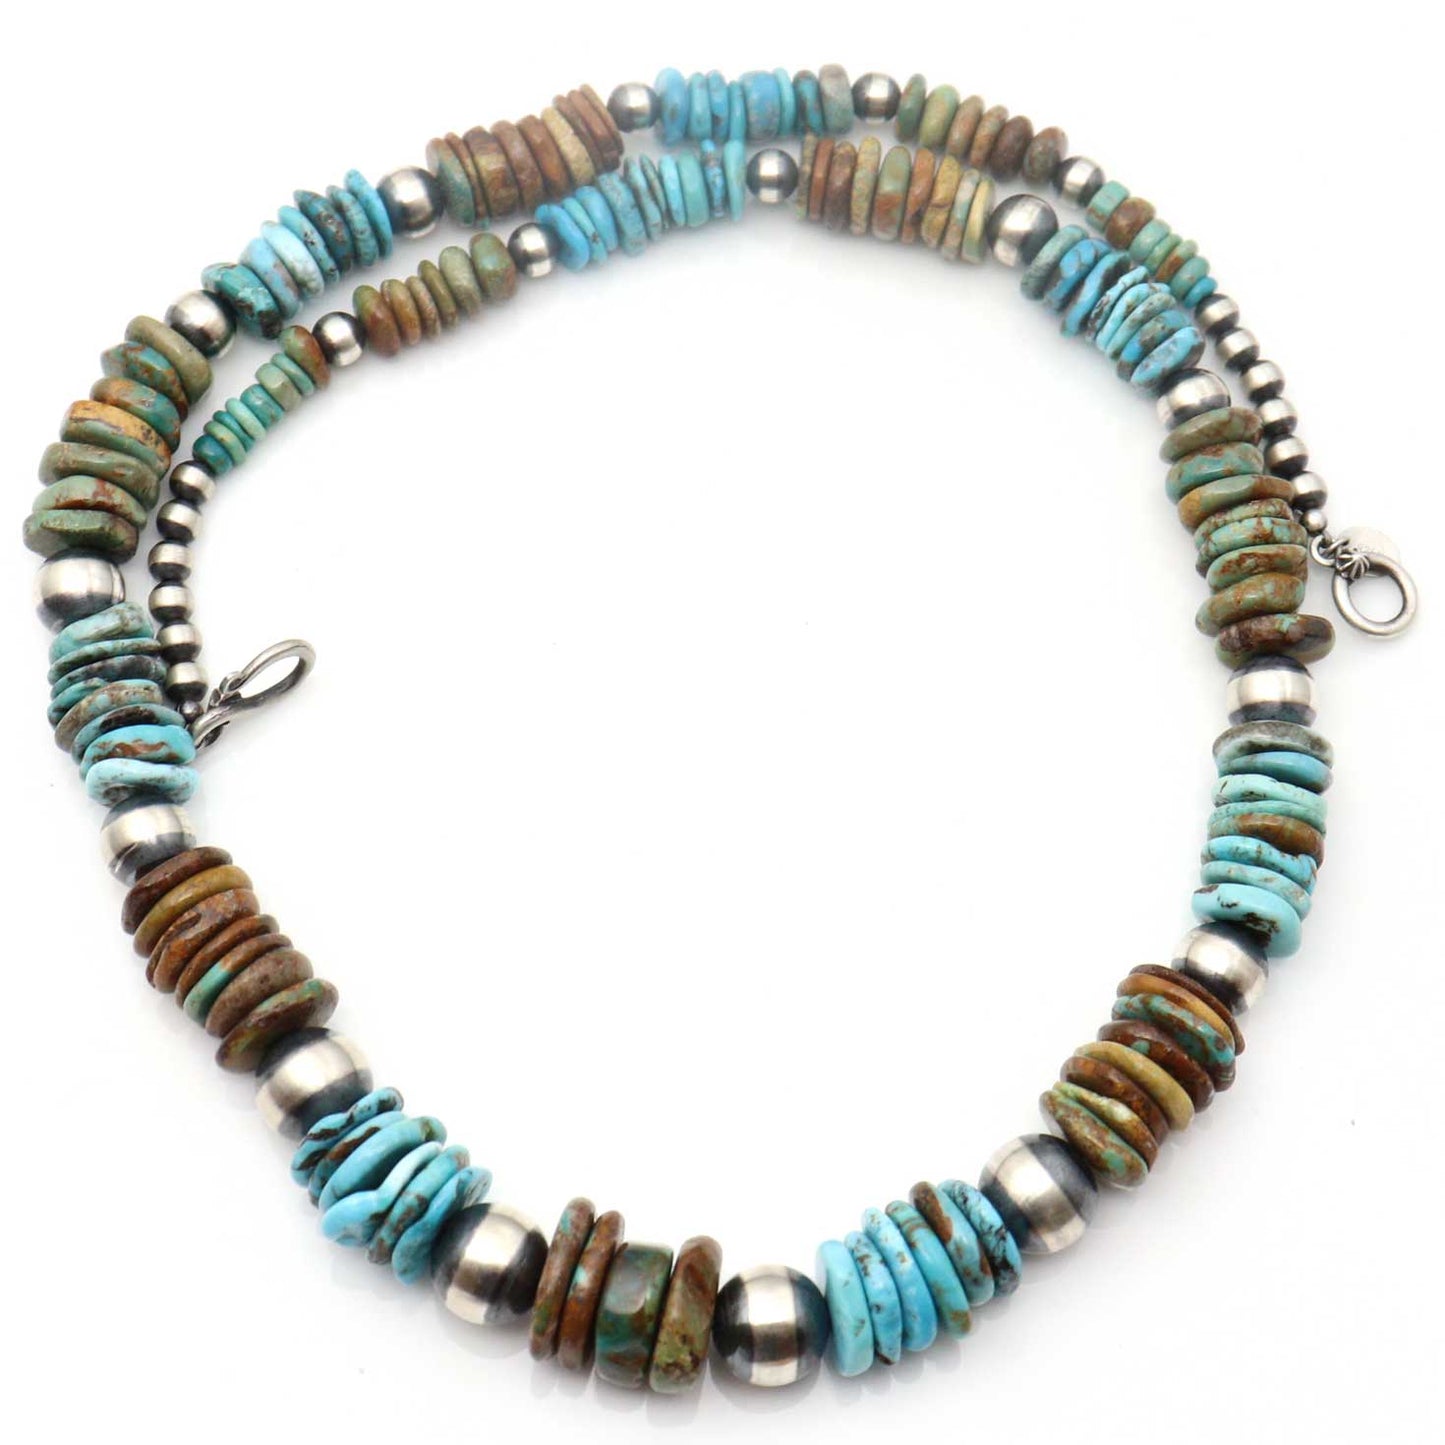 24" Graduated Turquoise Necklace With Silver Accent Beads